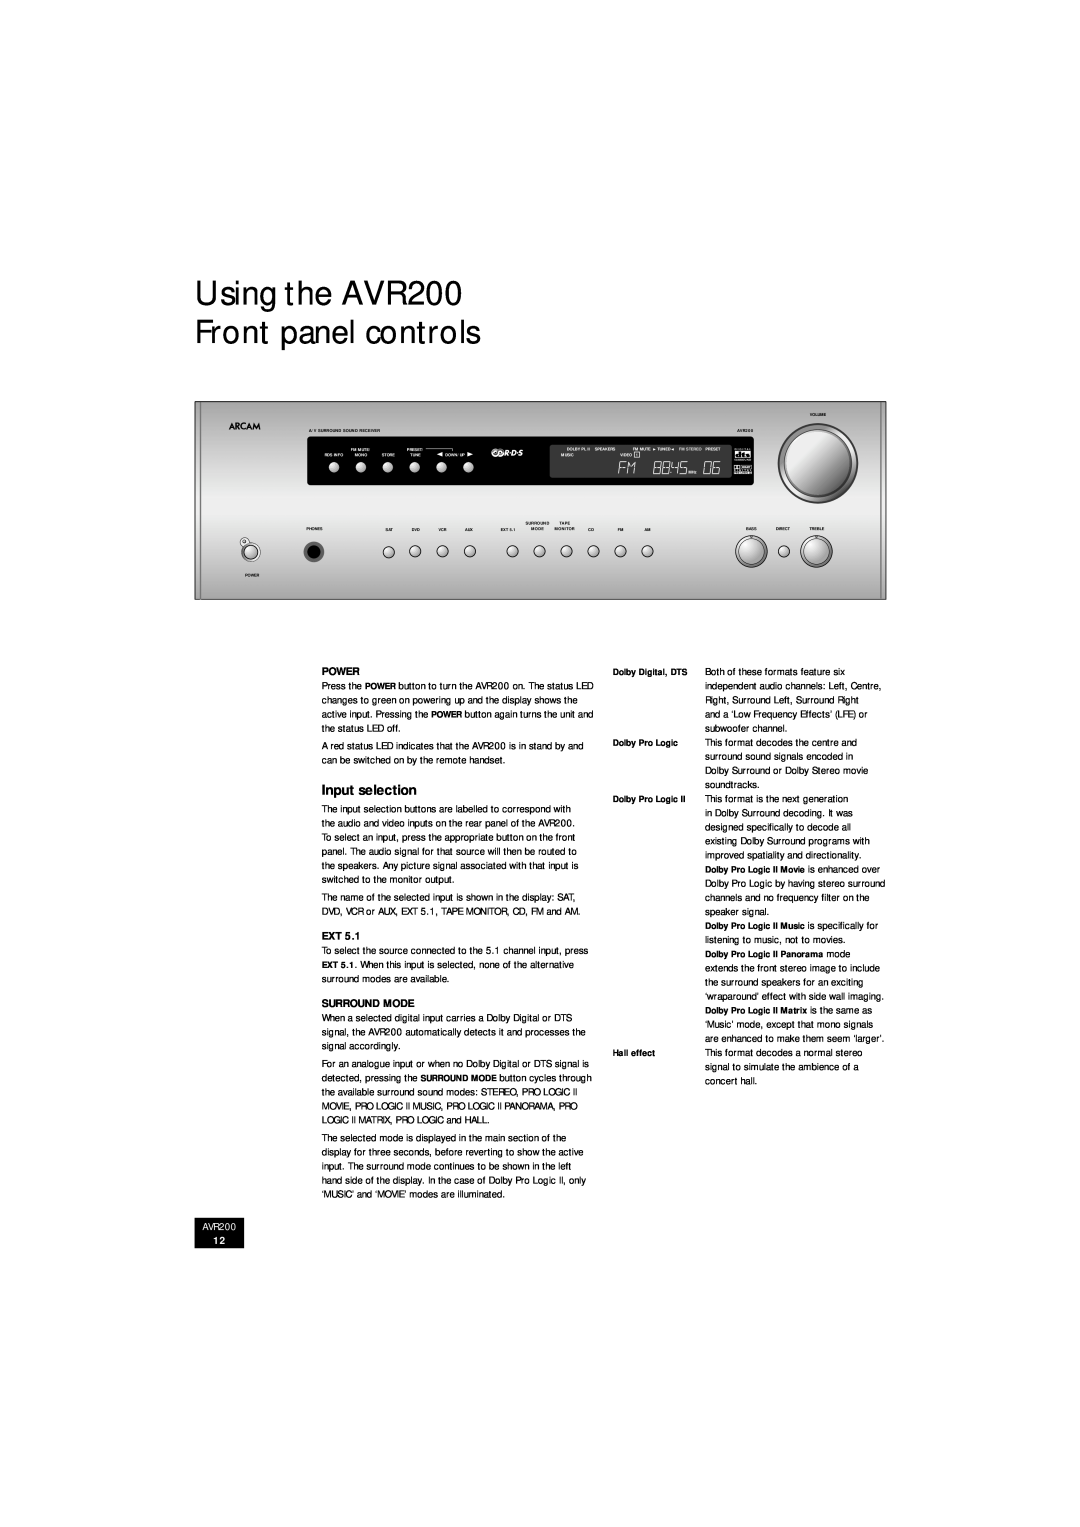 Arcam manual Using the AVR200 Front panel controls, Input selection, Power, Surround Mode 